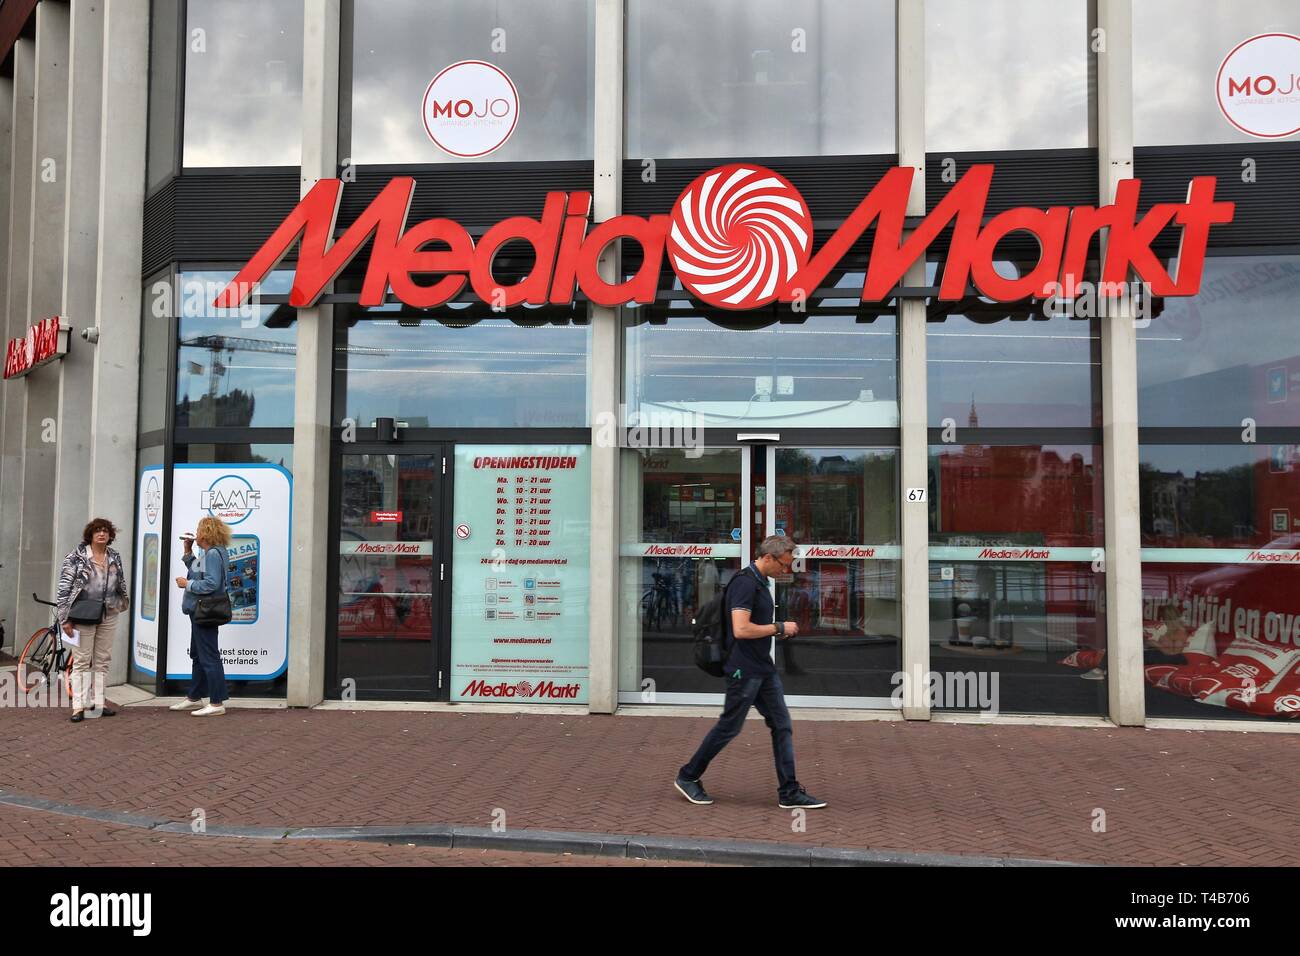 Tradeplace PIMS integration with MediaMarkt live in the Netherlands!